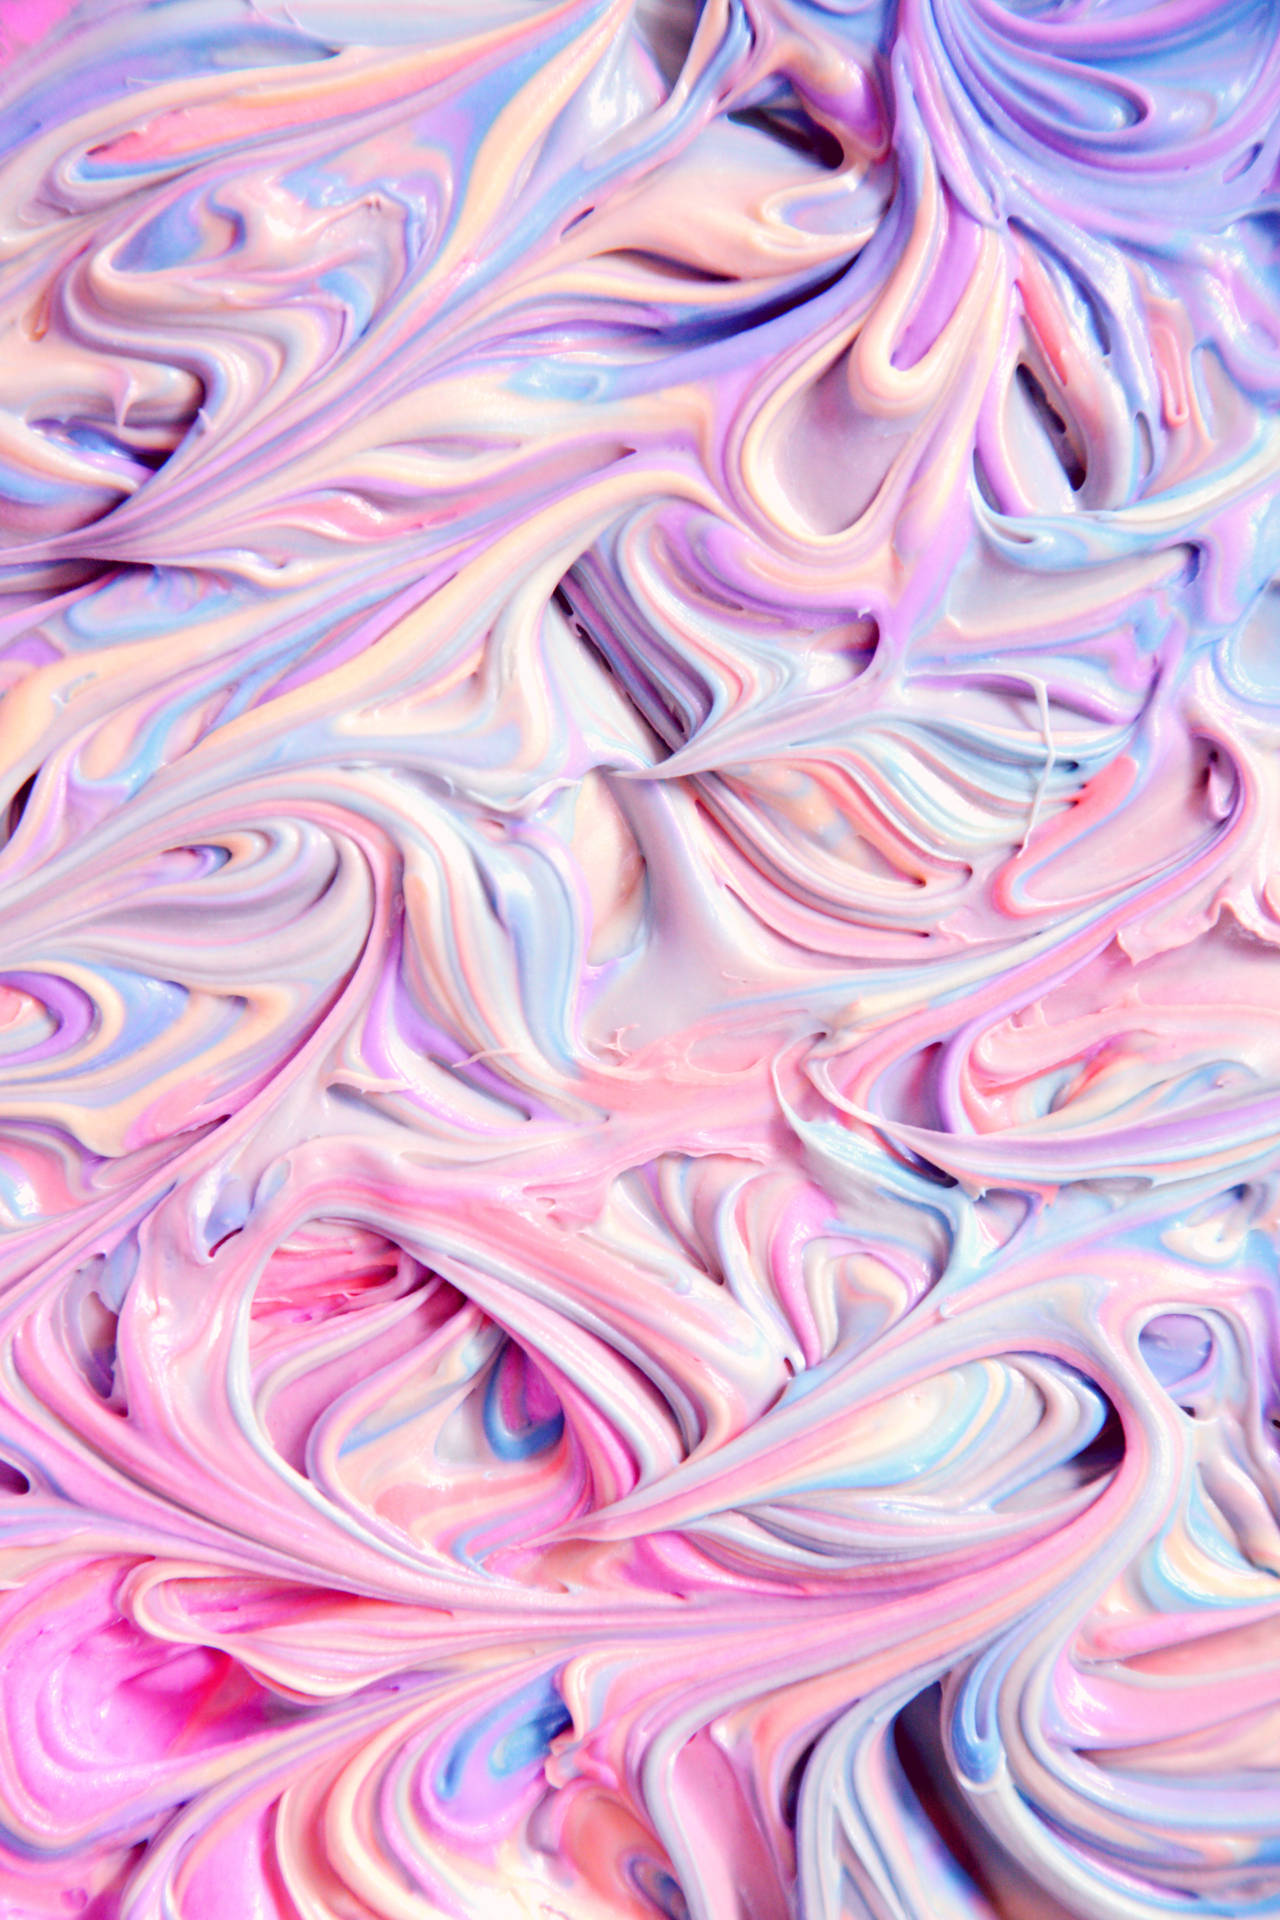 Abstract Swirls Of Natural Pastel Colors Wallpaper